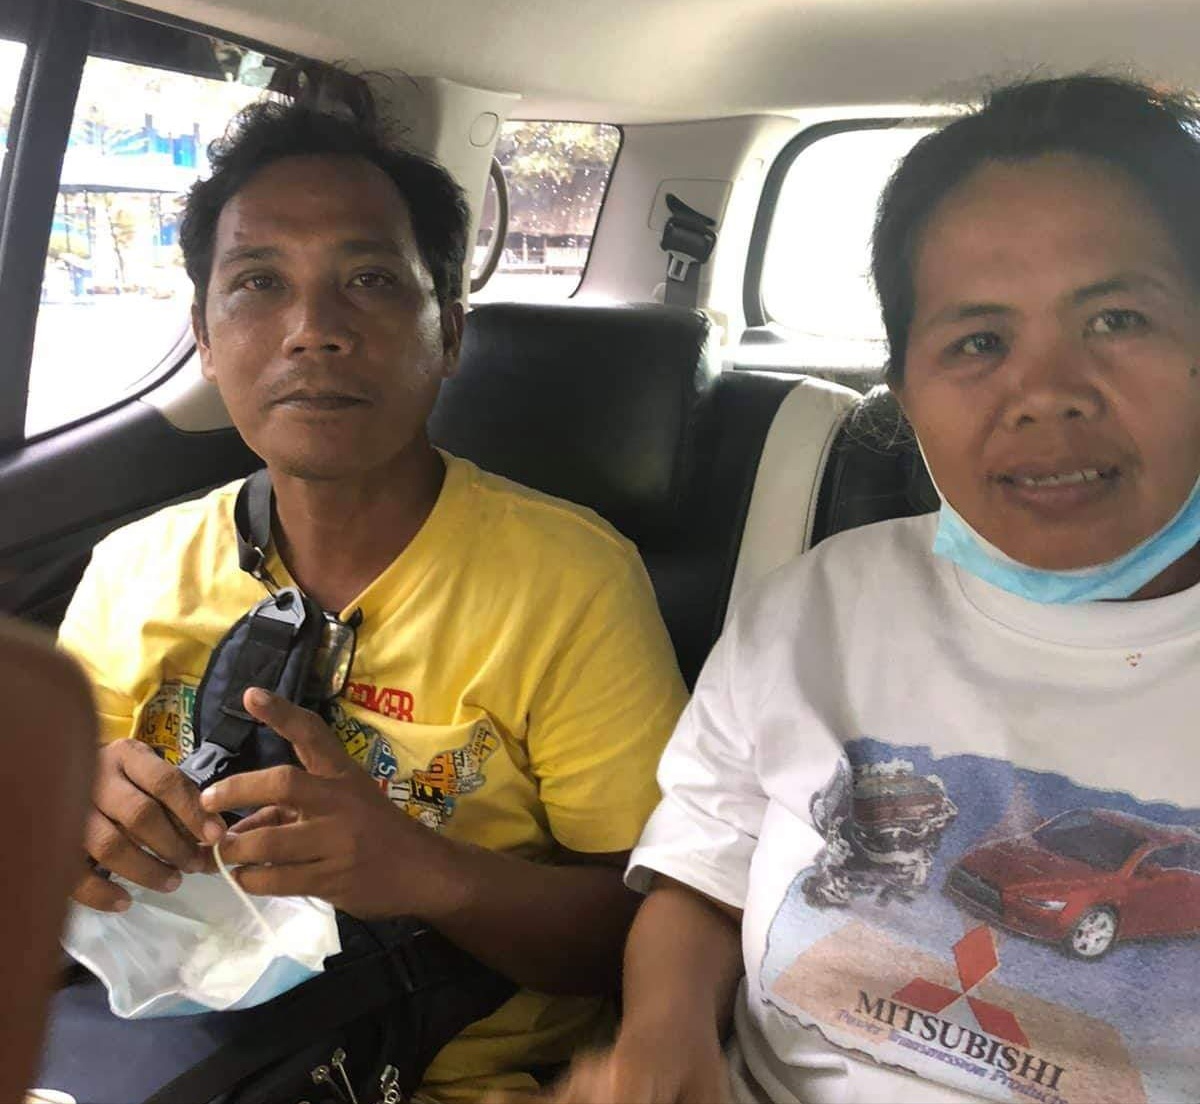 Couple believed to be CPP-NPA officials arrested in Getafe